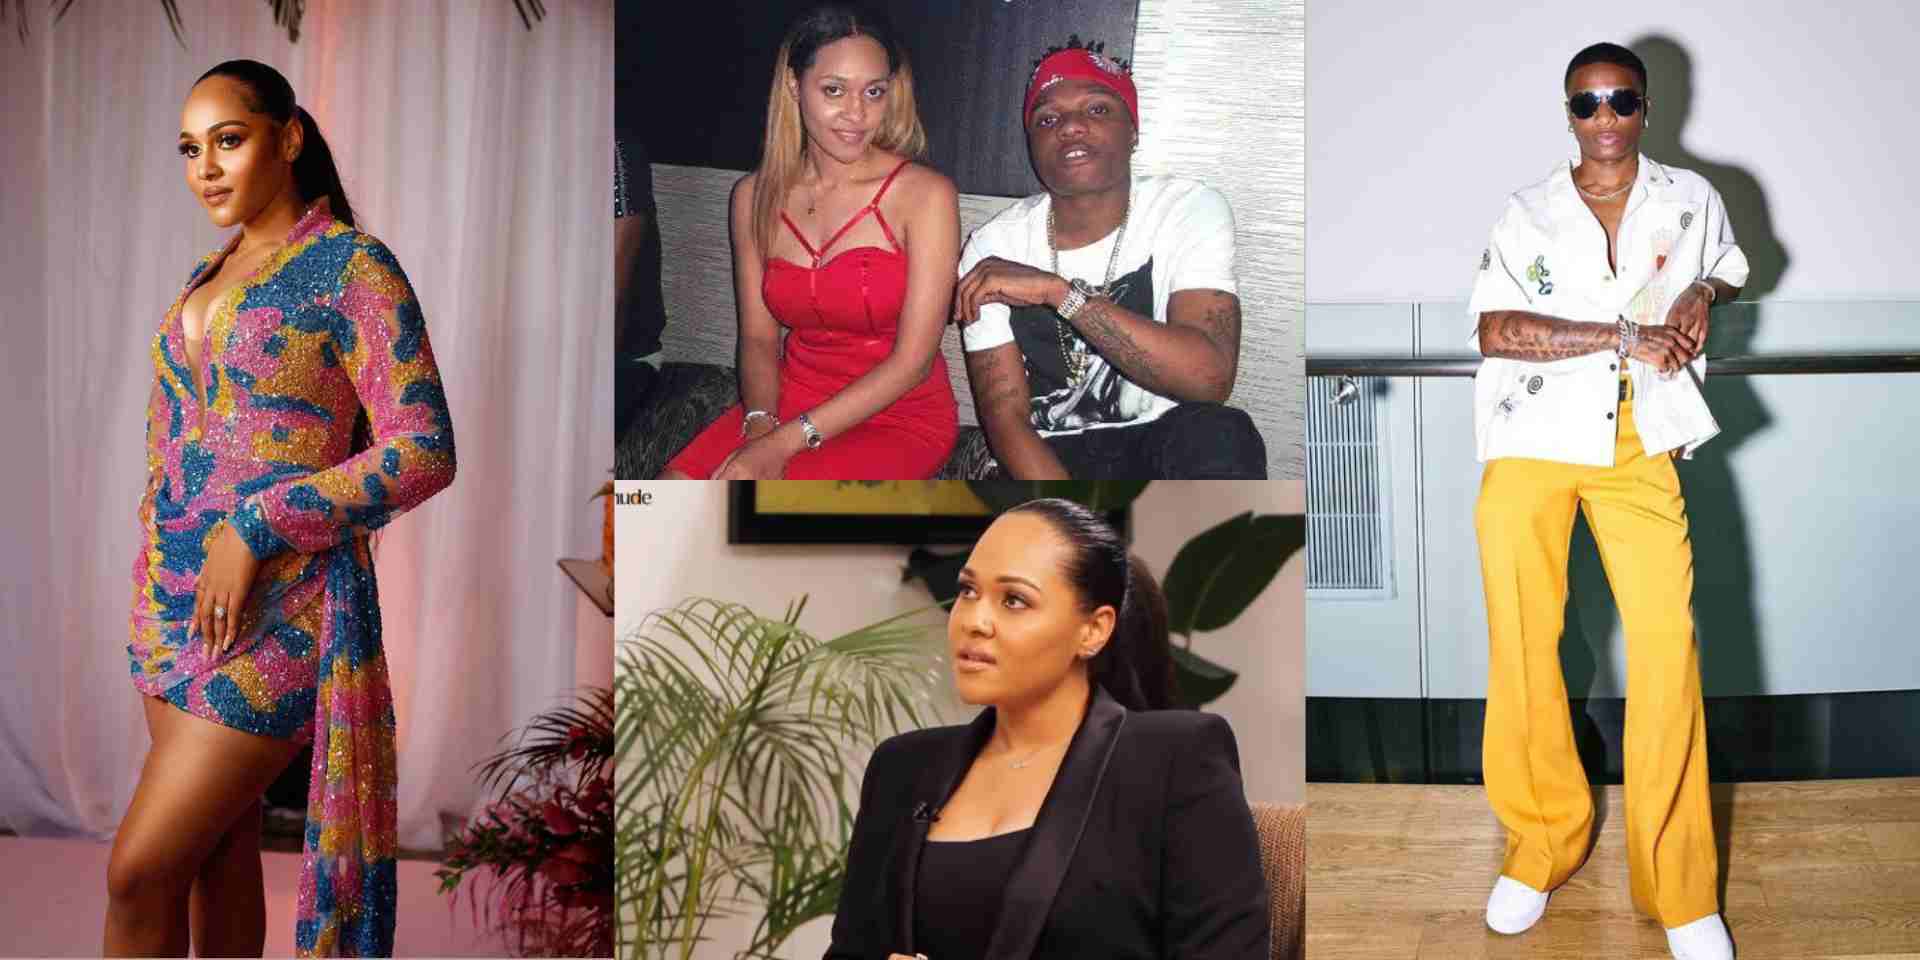 "He was my best friend" - Tania Omotayo speaks on relationship with Wizkid, reveals how she feels when described as singer's 'ex' (Video)